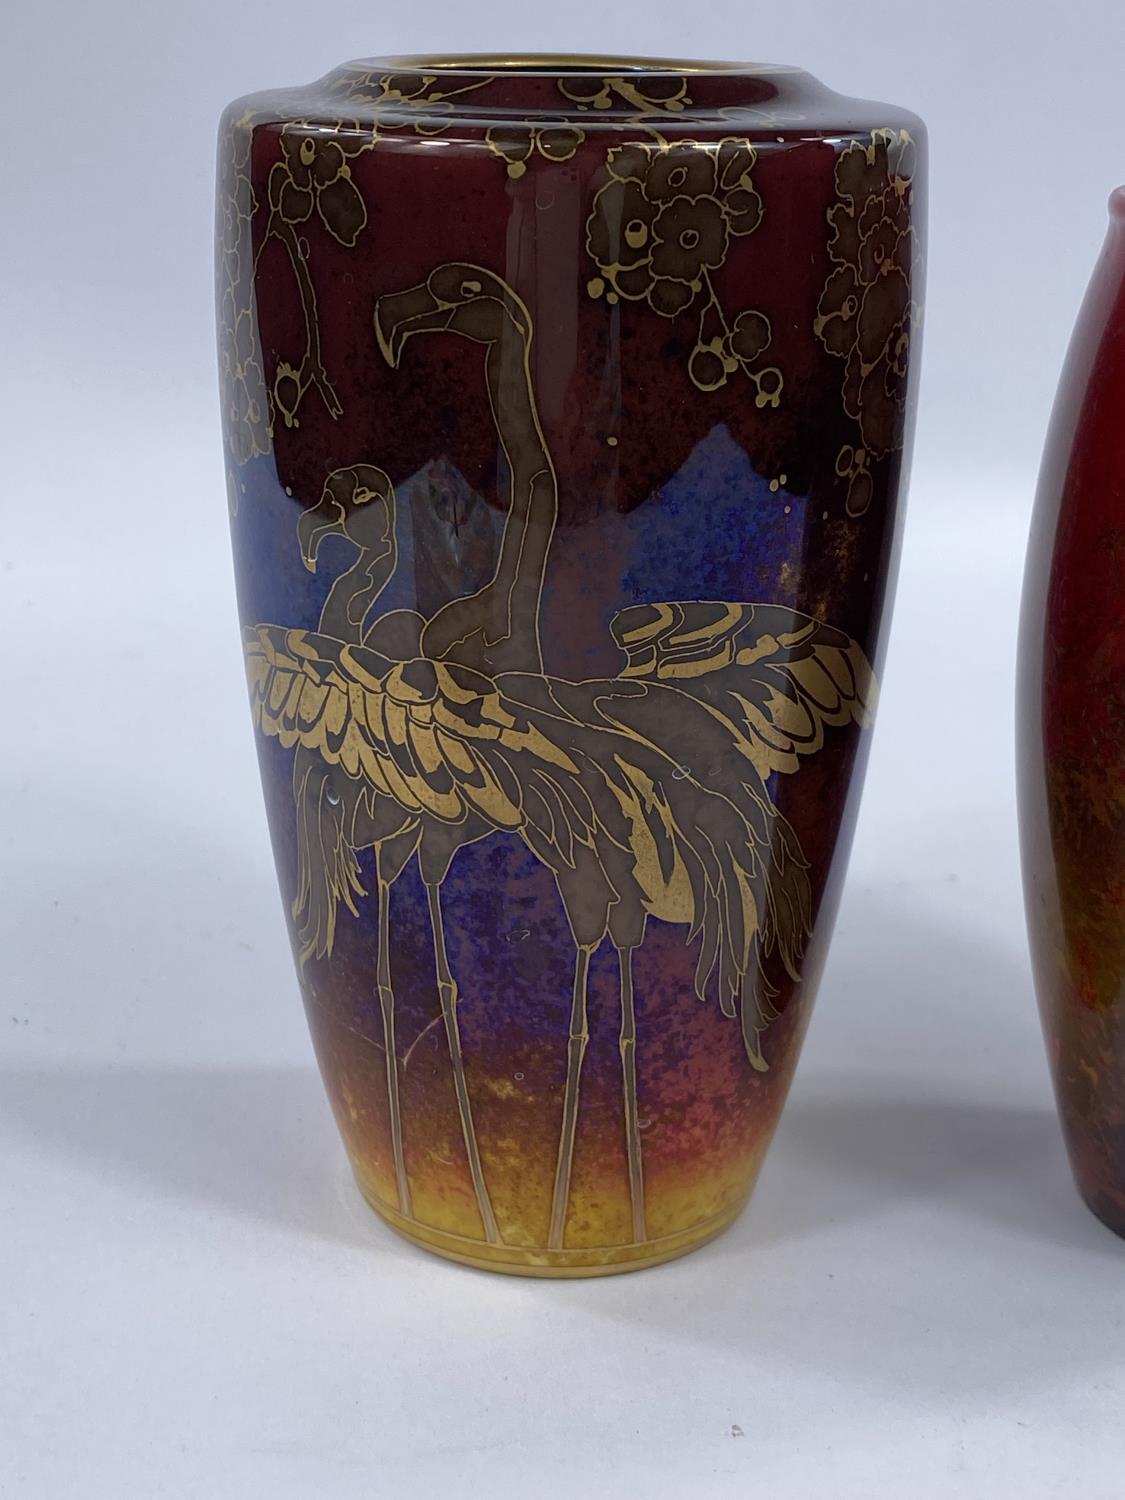 A Royal Doulton Flambe vase designed by Charles Noke, decorated with gilt highlights of Flamingos - Image 2 of 4